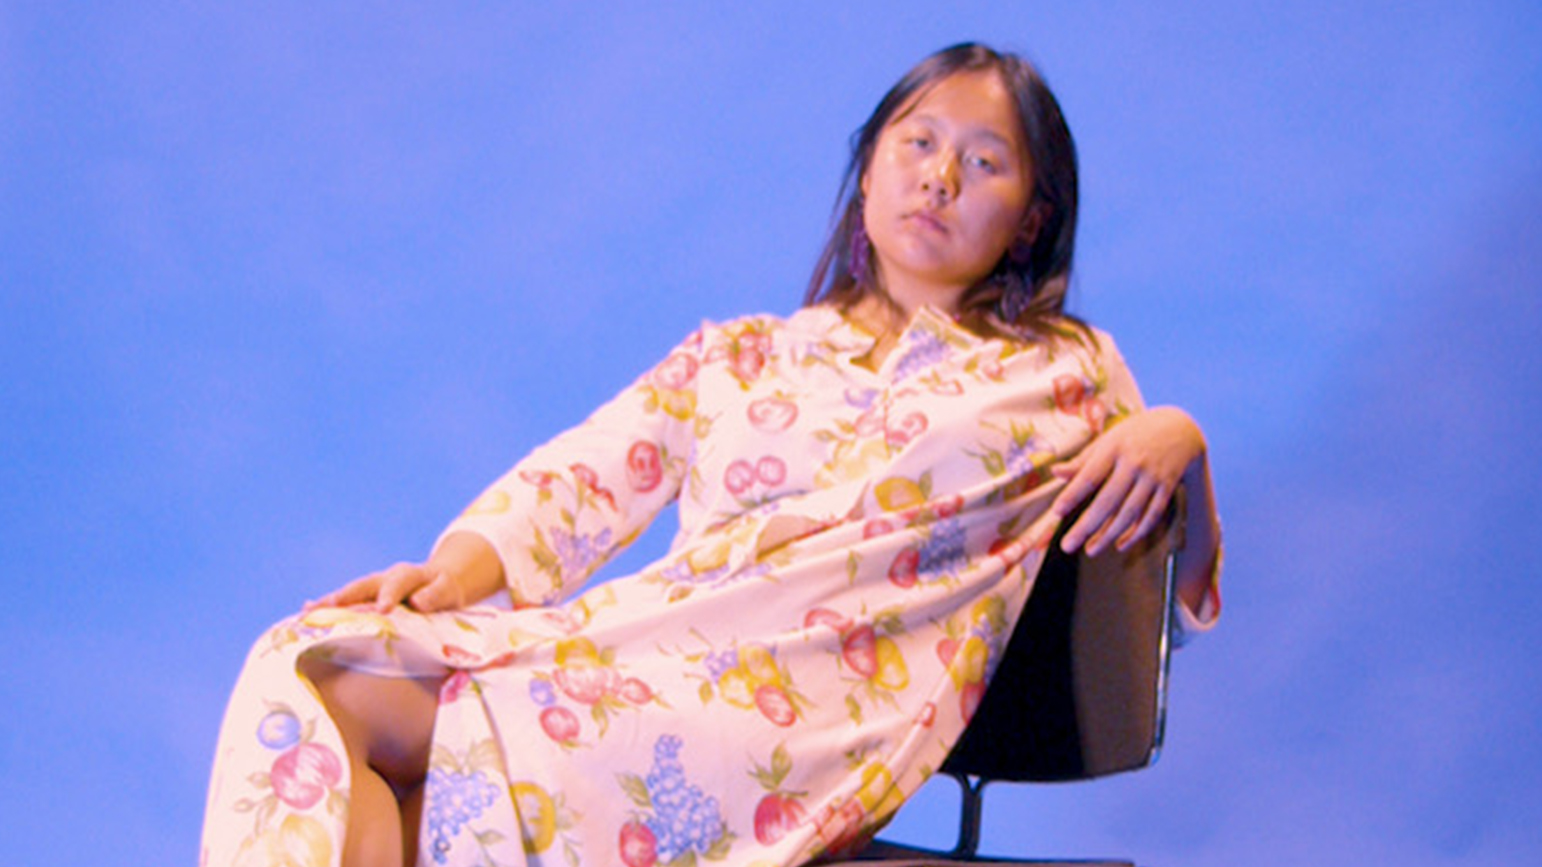 Image of Nana Cheon leaning back in a chair against a blue background